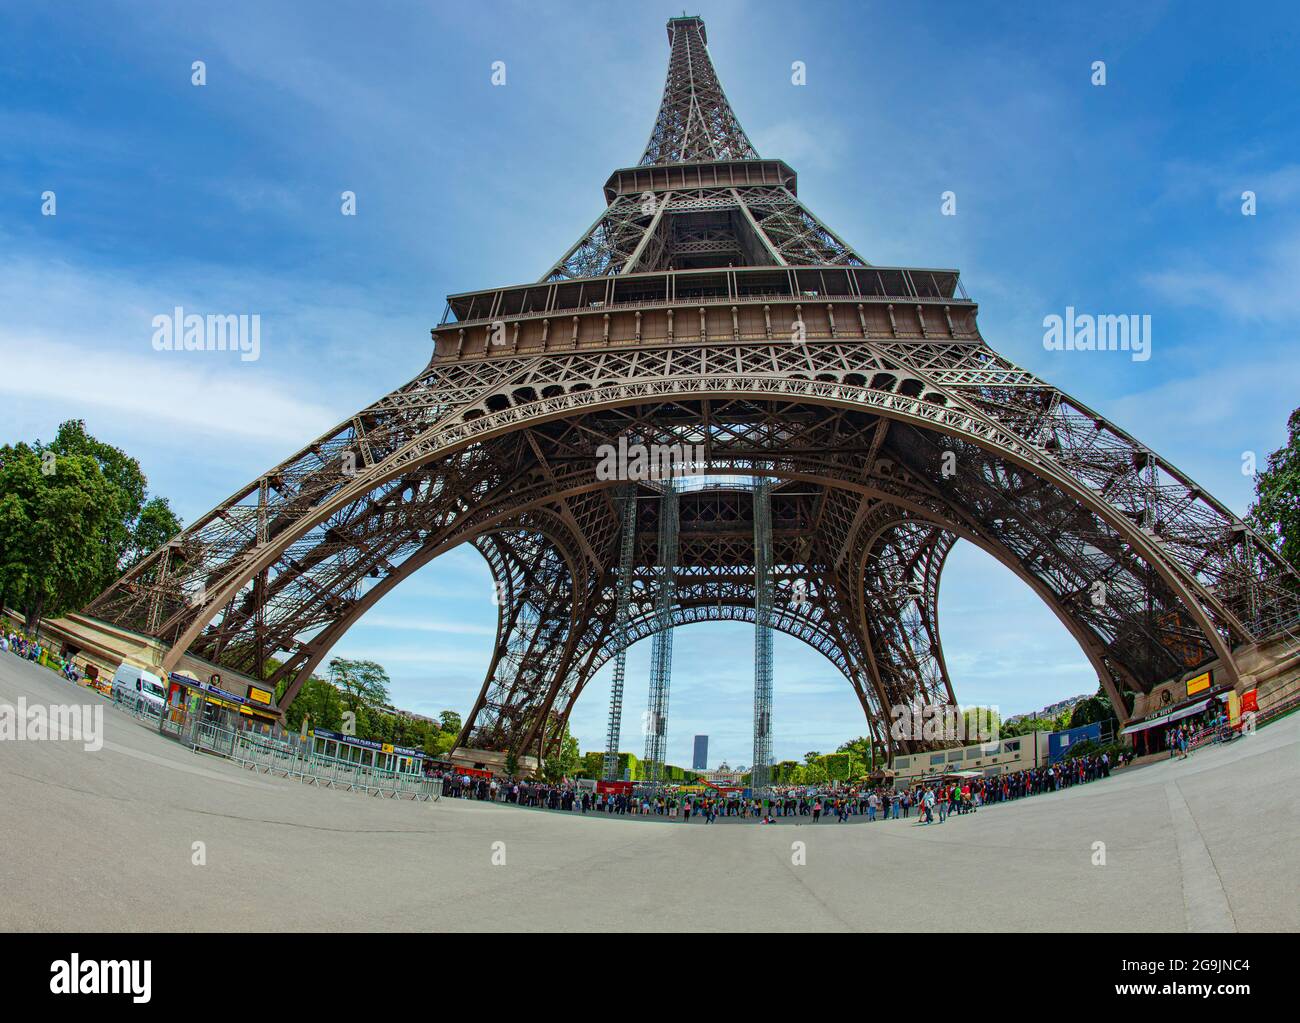 Under the Eiffel Tower in Paris, France Stock Photo